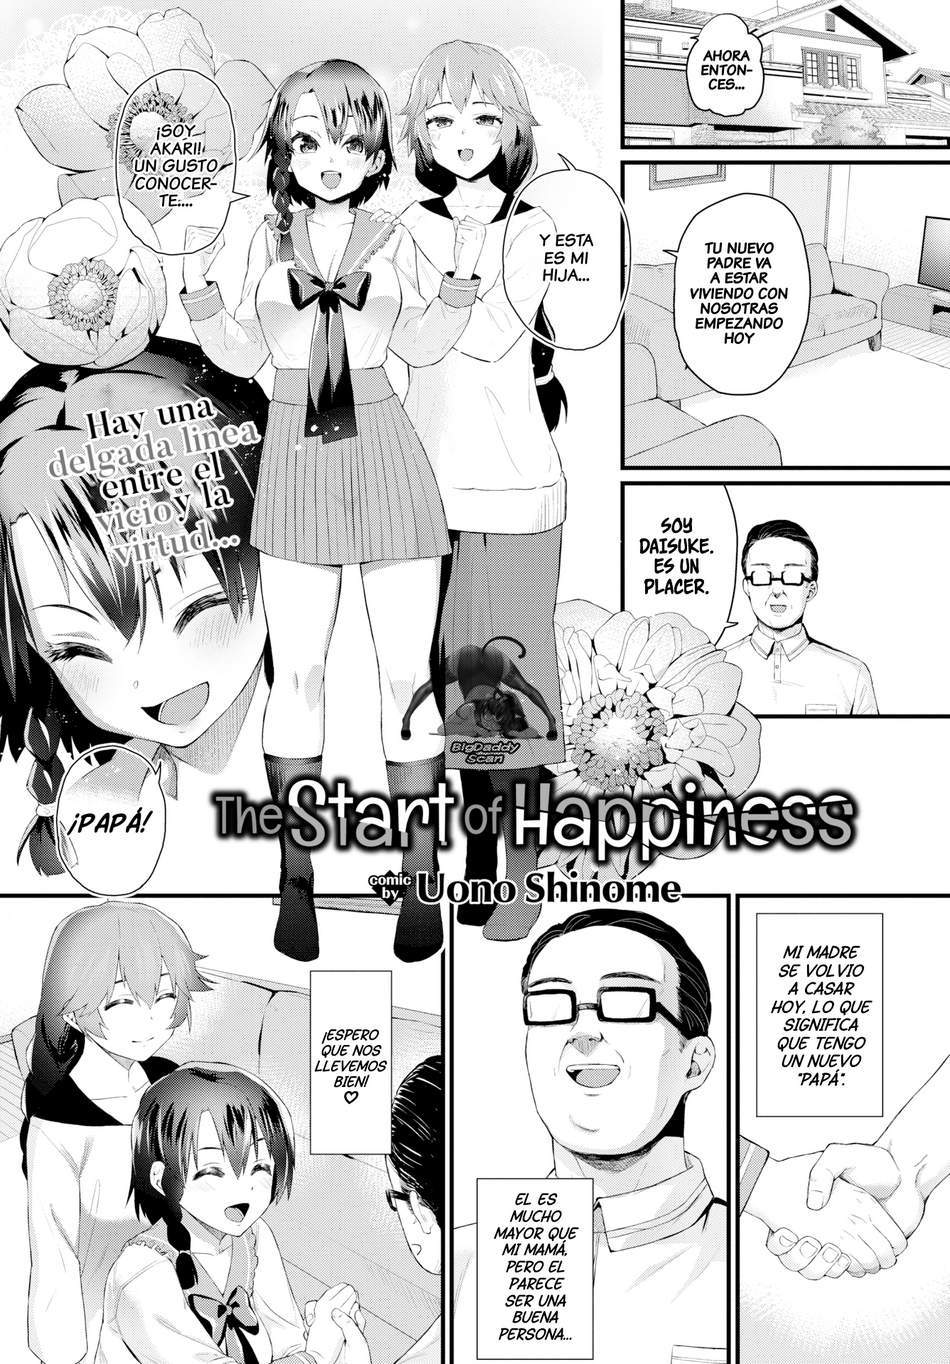 The Start of Happiness - Page #1